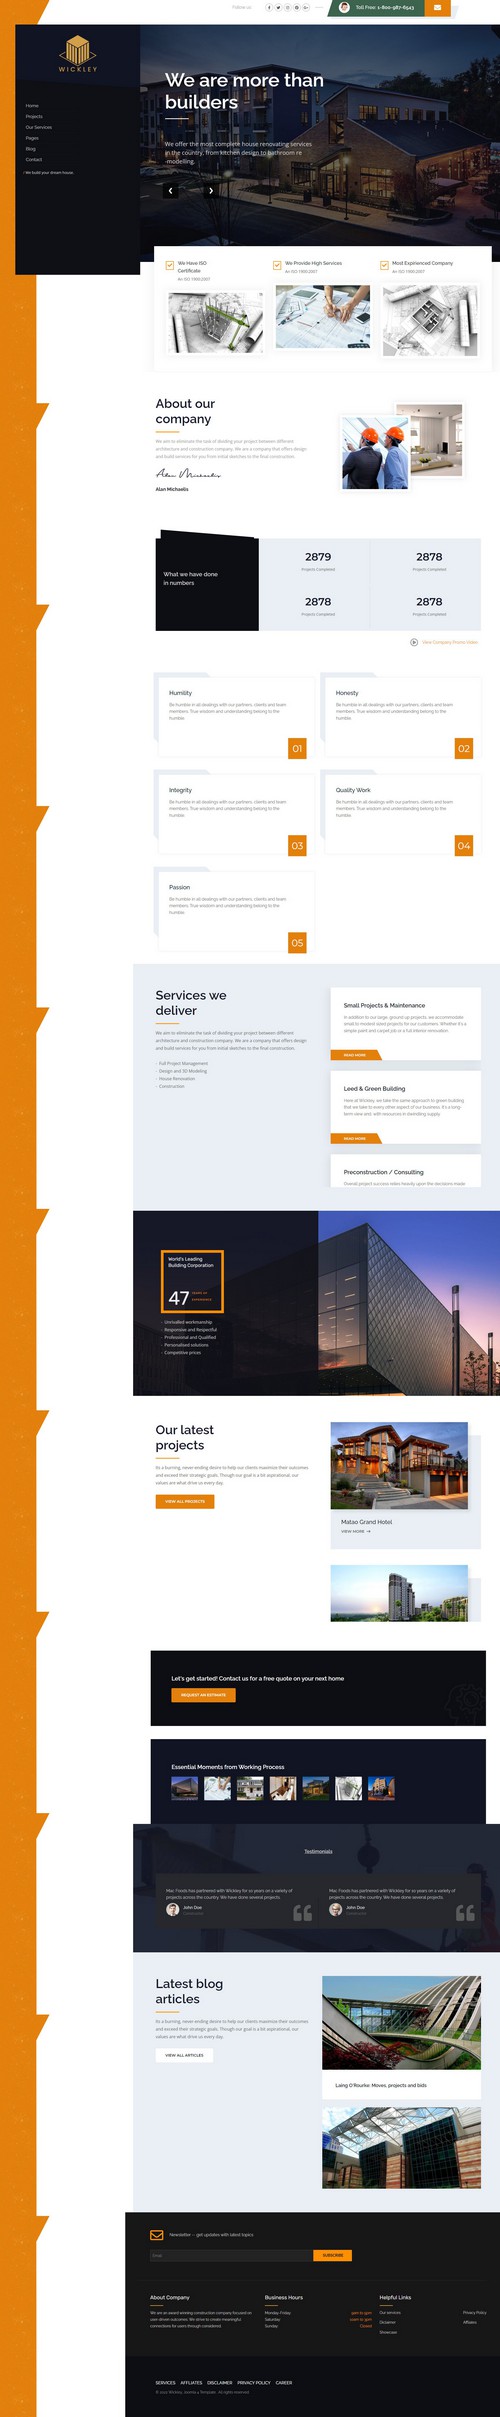 Wickley - Construction, Industry and Factory Joomla 4 Template